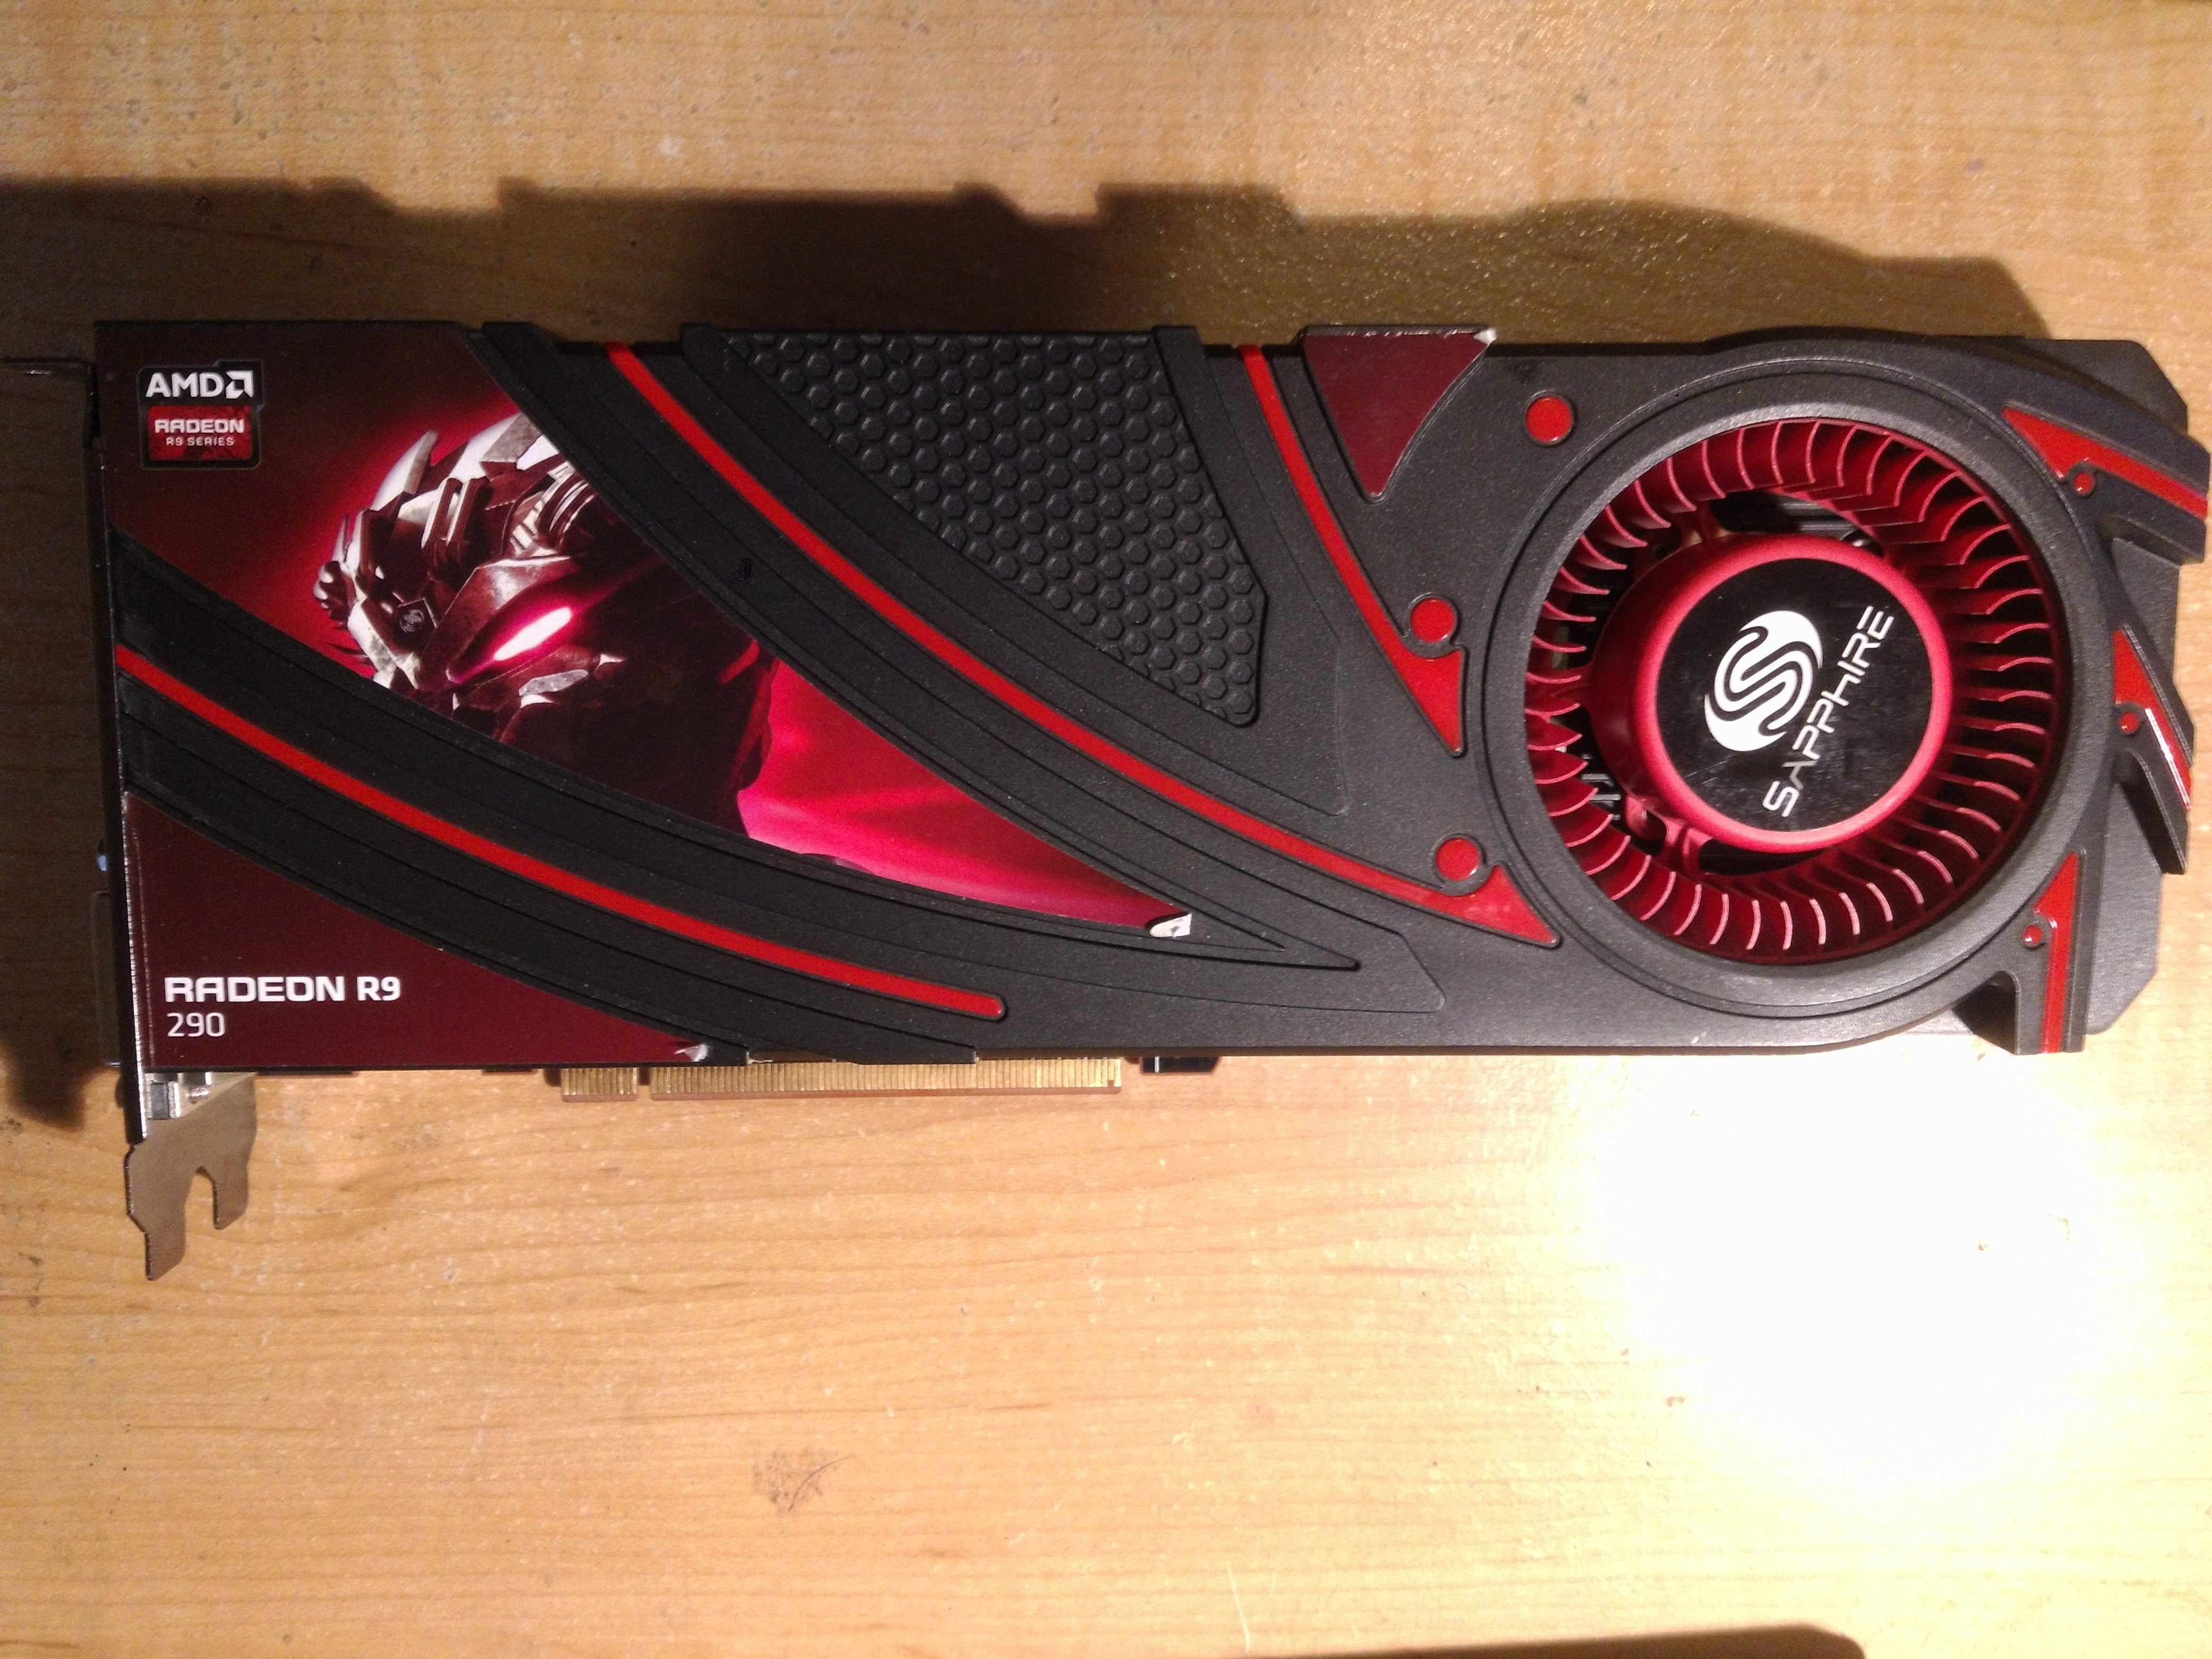 Sapphire Reference Amd Radeon R9 290 4gb Video Card 0 For Sale Redflagdeals Com Forums